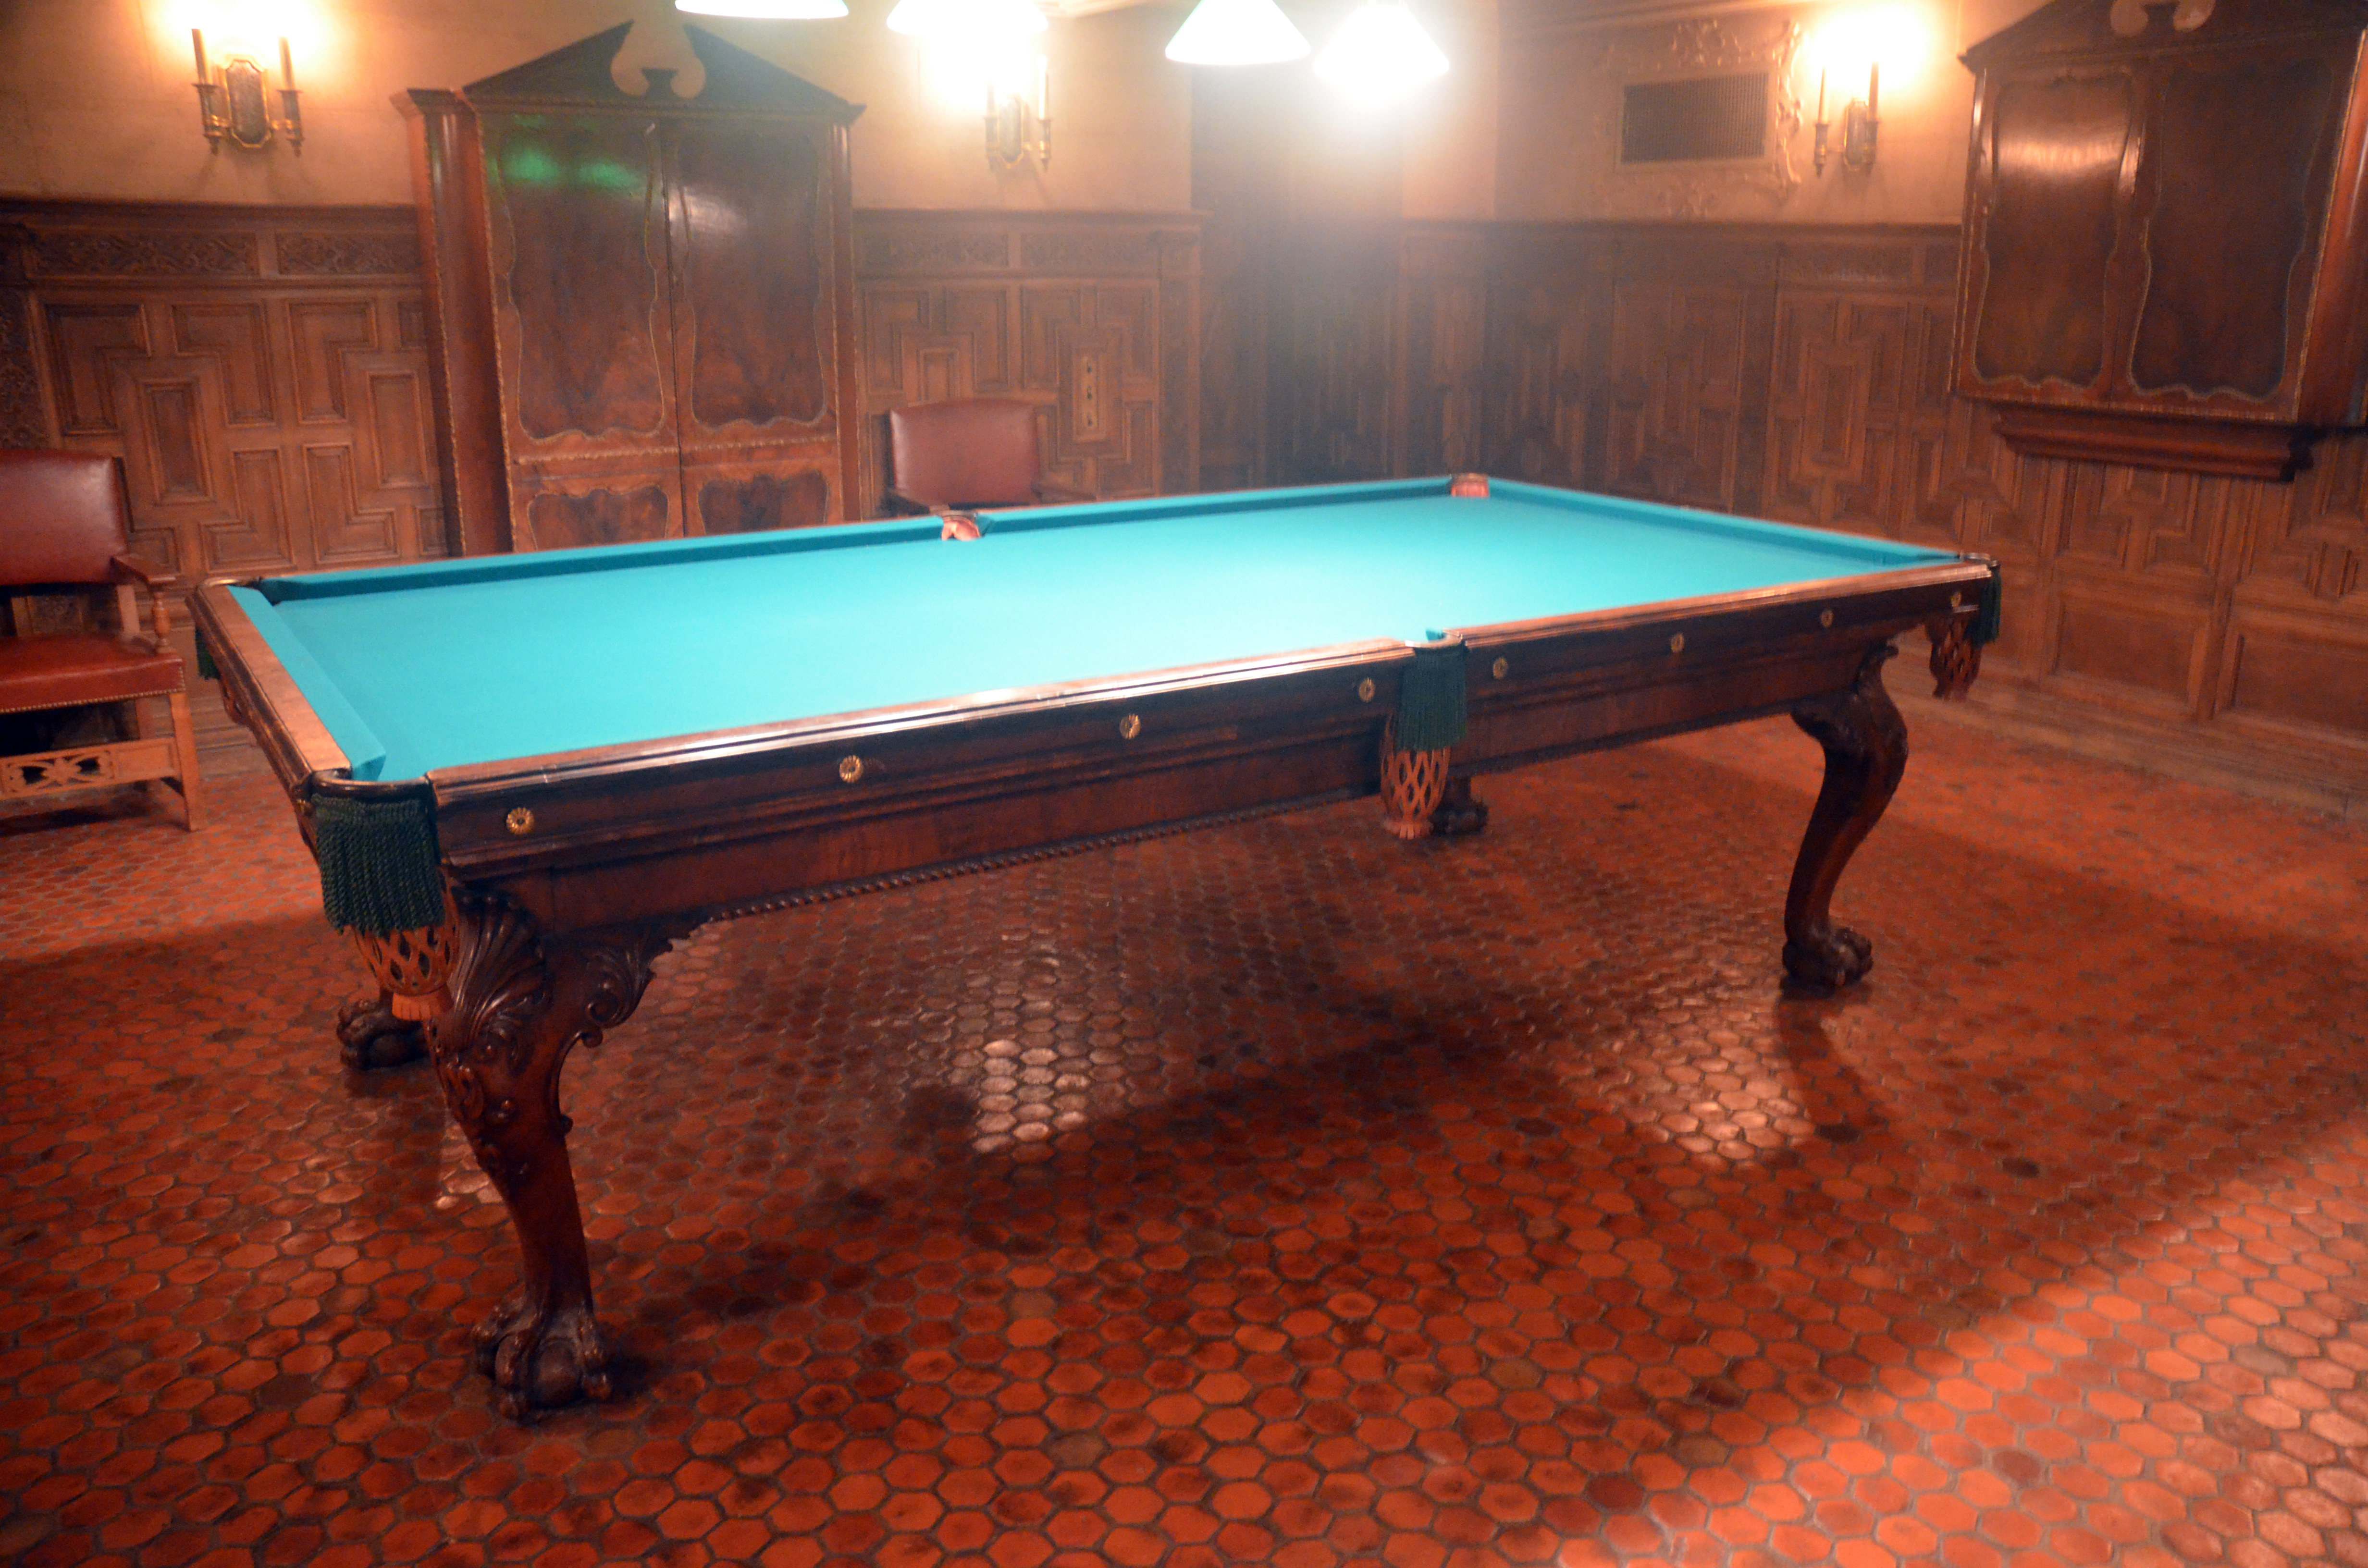 The billiard table at the Frick Collection as seen in late 2012 (credit: Evan Bindelglass / CBSNewYork)